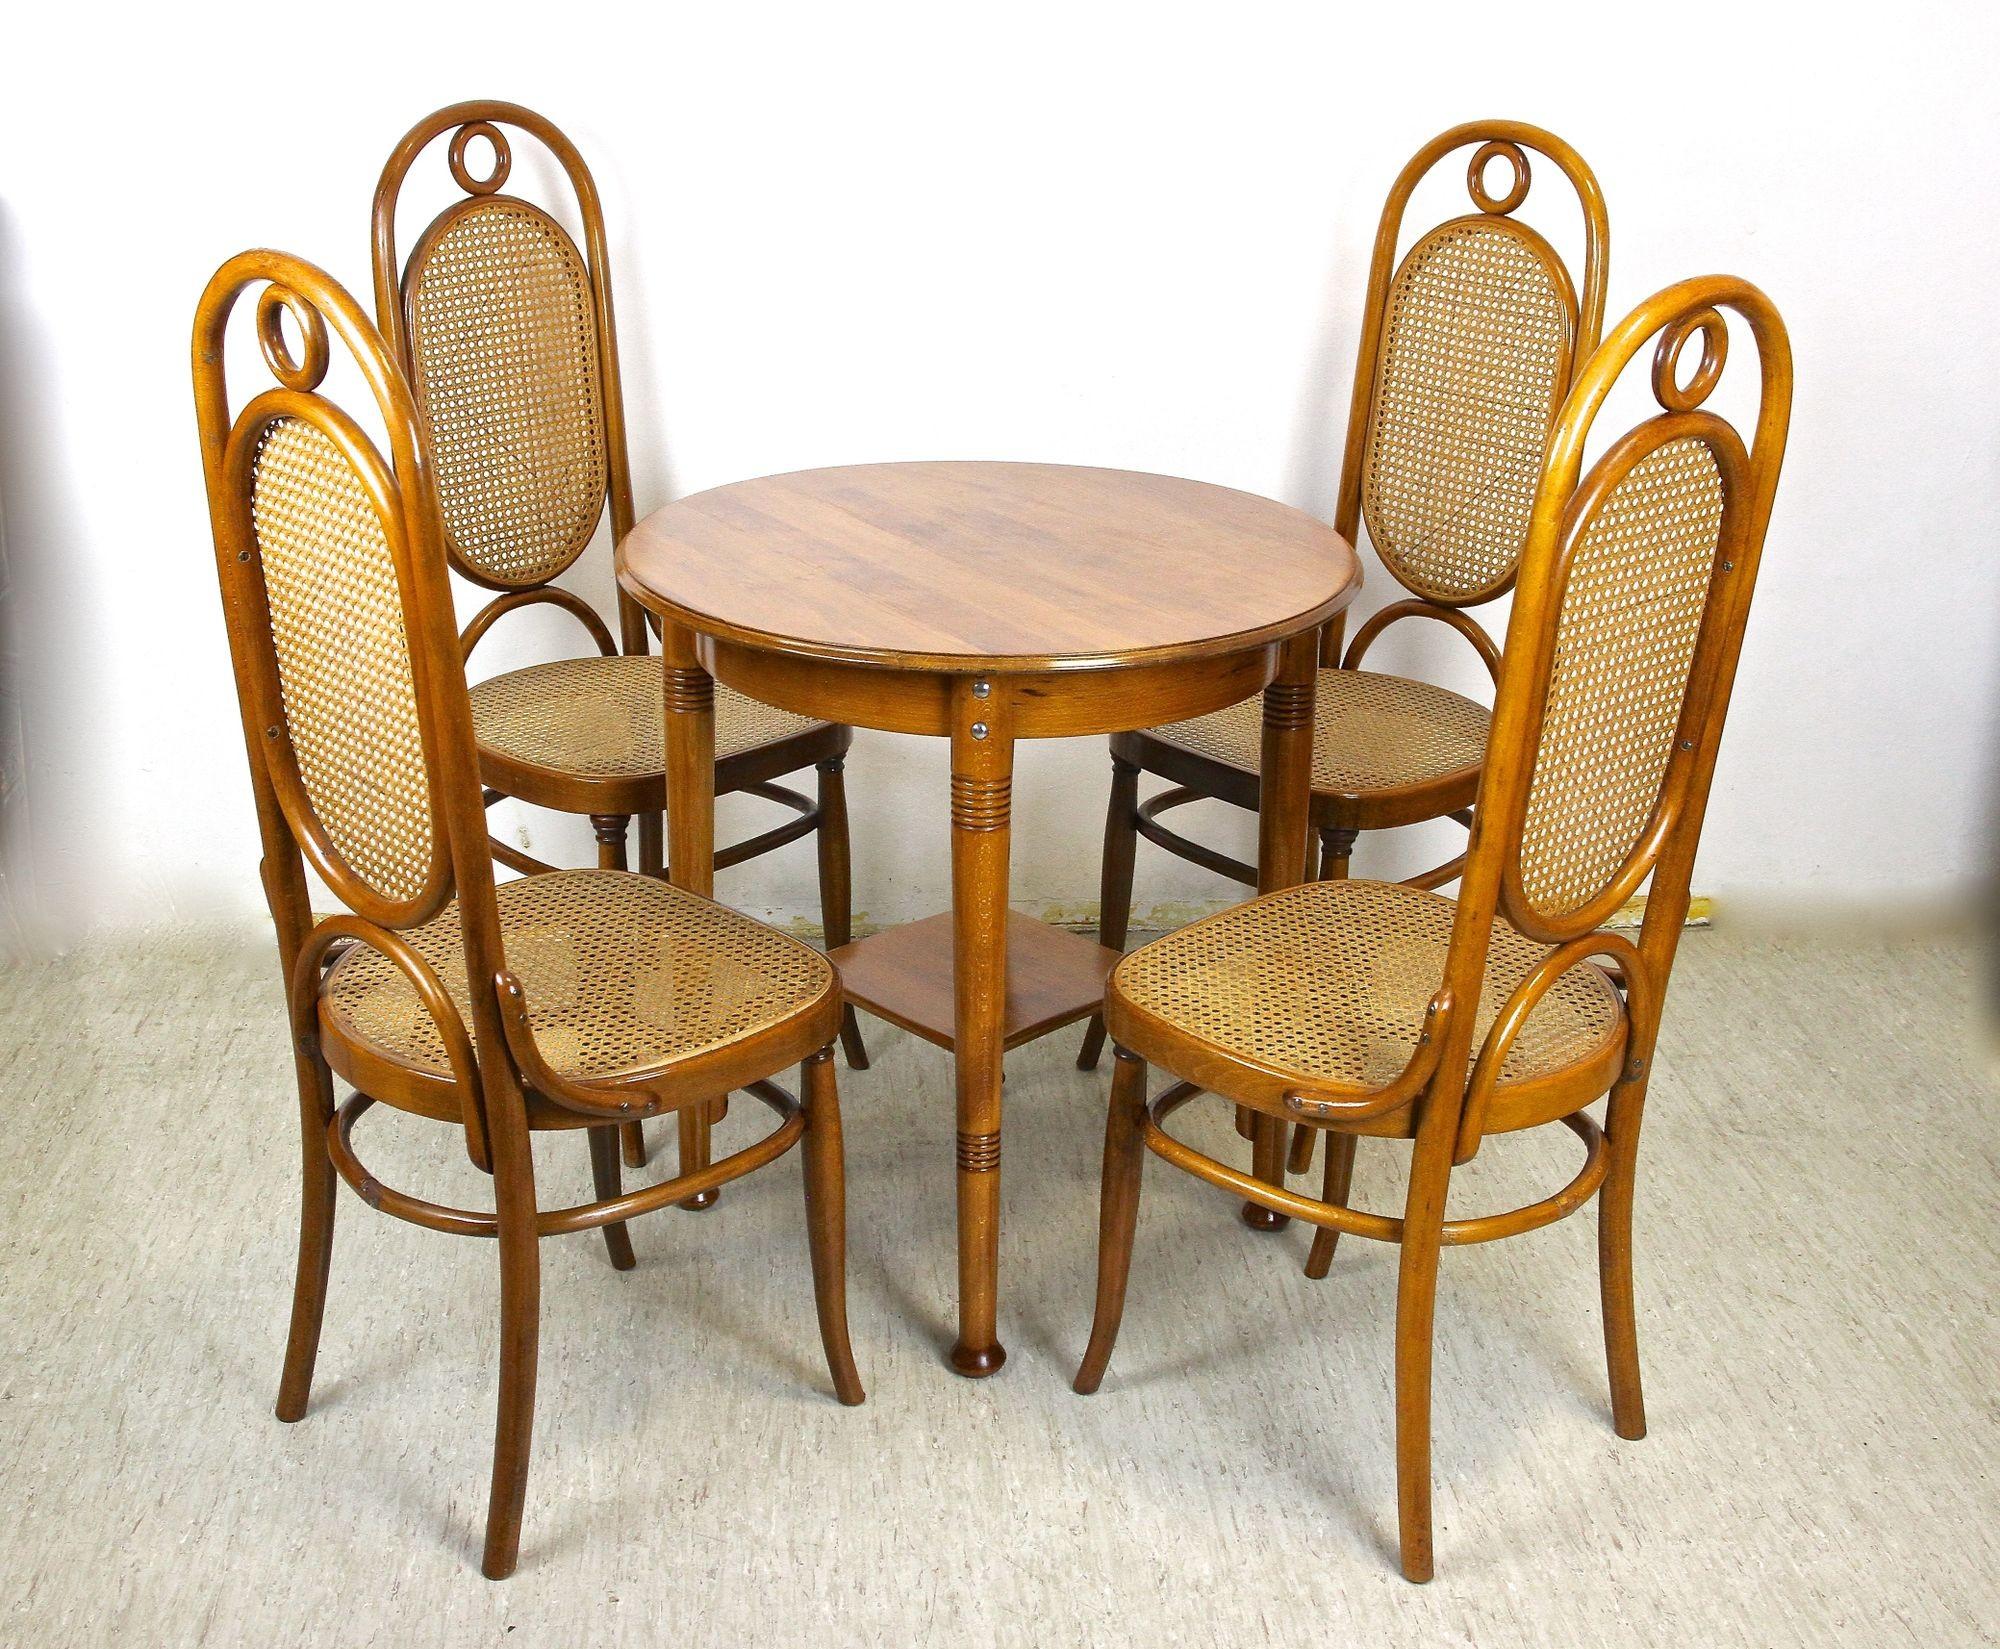 Thonet Bentwood Chairs with Table, Art Nouveau Seating Set, Austria, circa 1915 For Sale 9